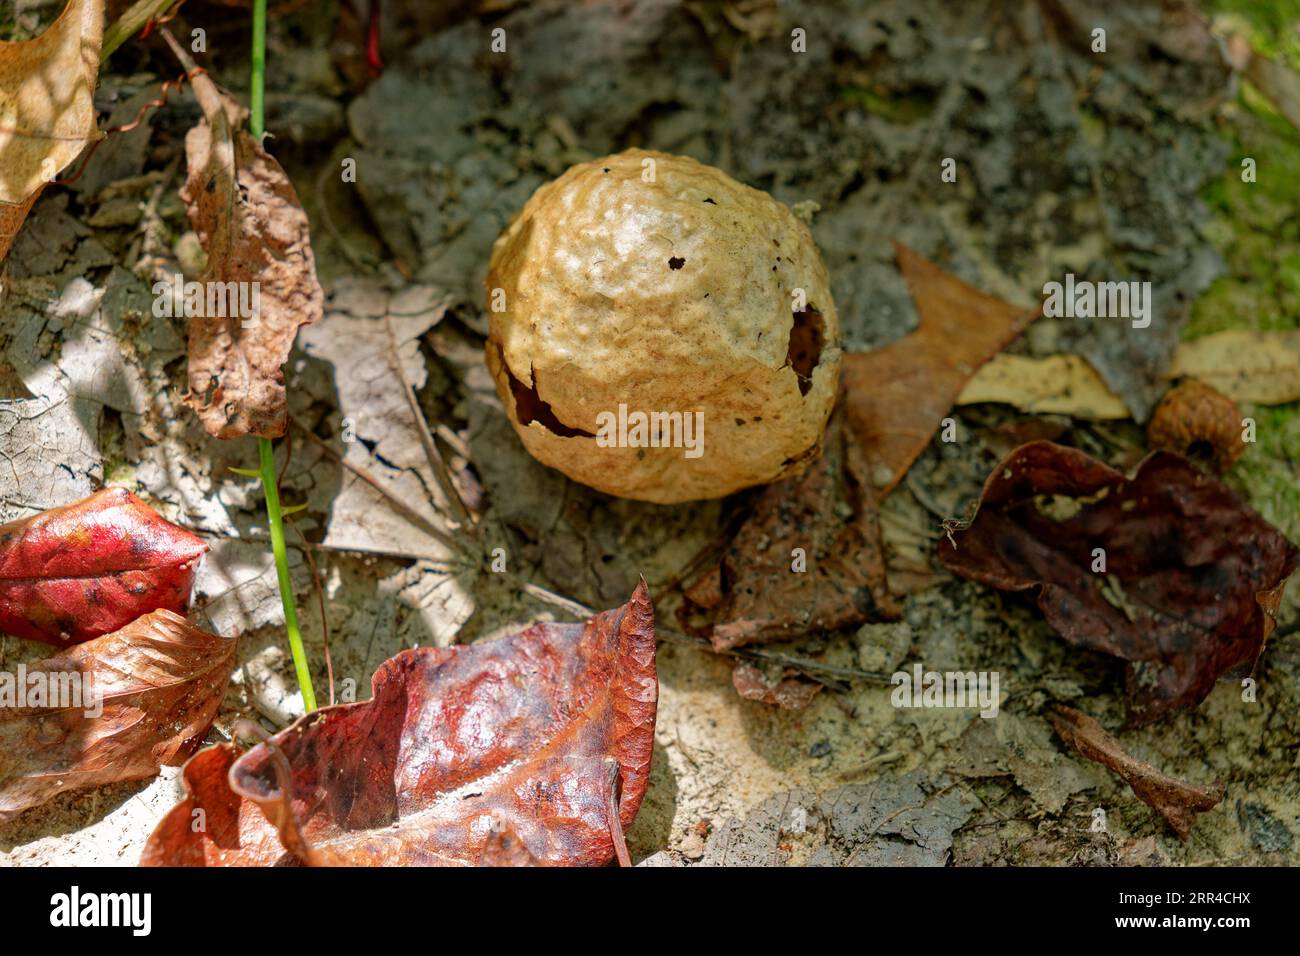 A round gall from a wasp or insect laying on the ground hollow with a few holes and cracks surrounded by fallen leaves on a sunny day in summertime Stock Photo